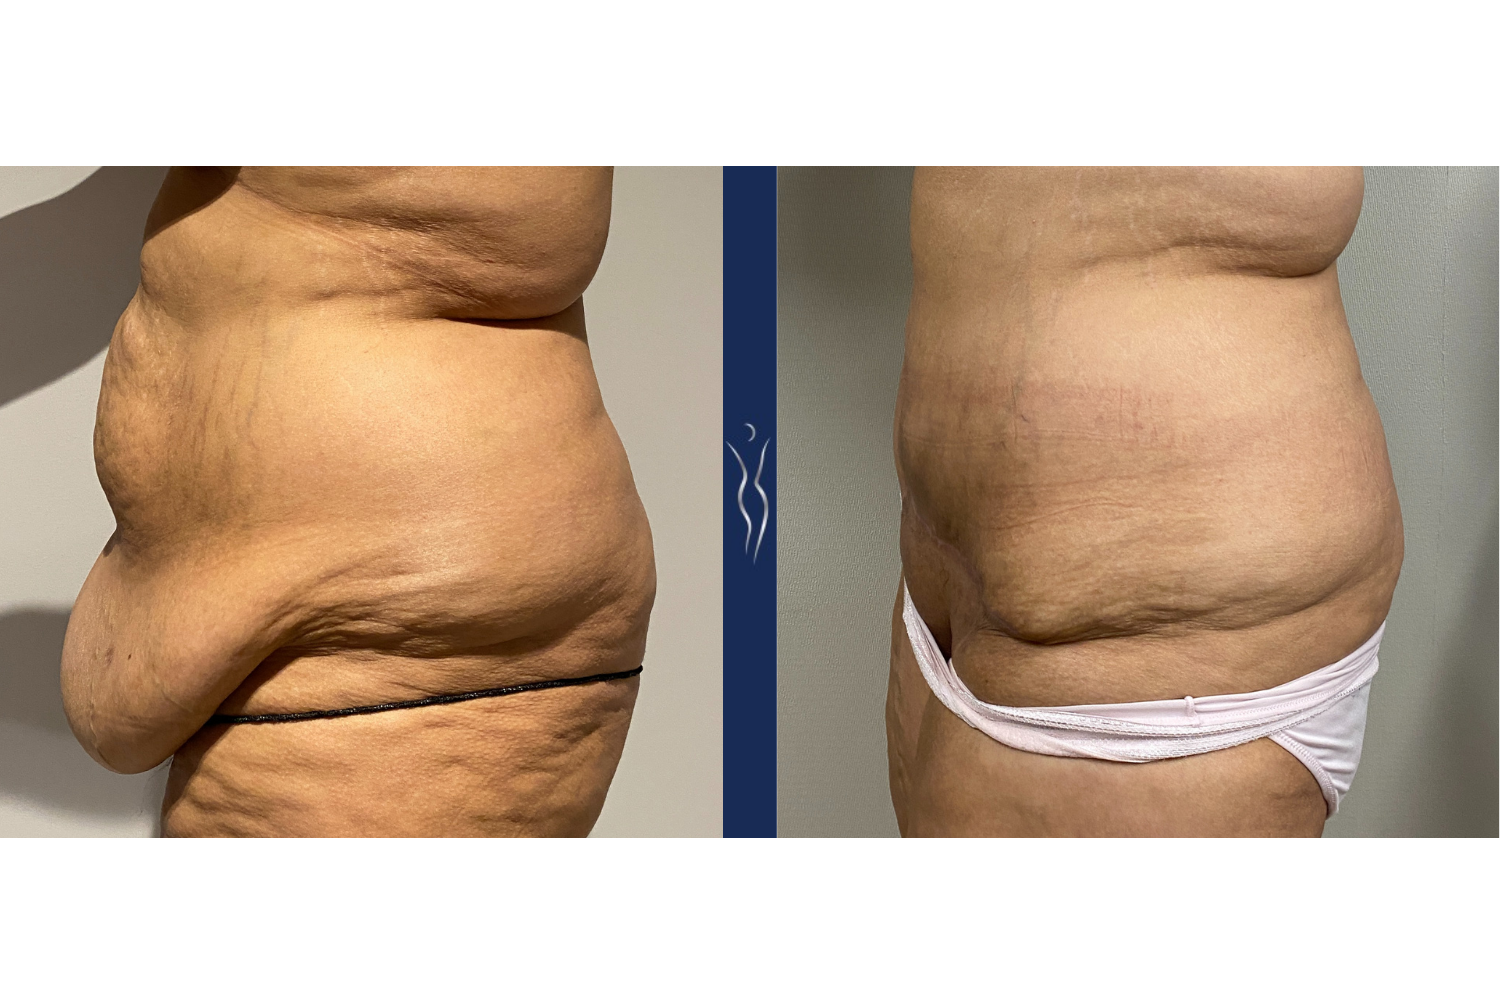 Tummy Tuck and Liposuction on Male Weight Loss Patient